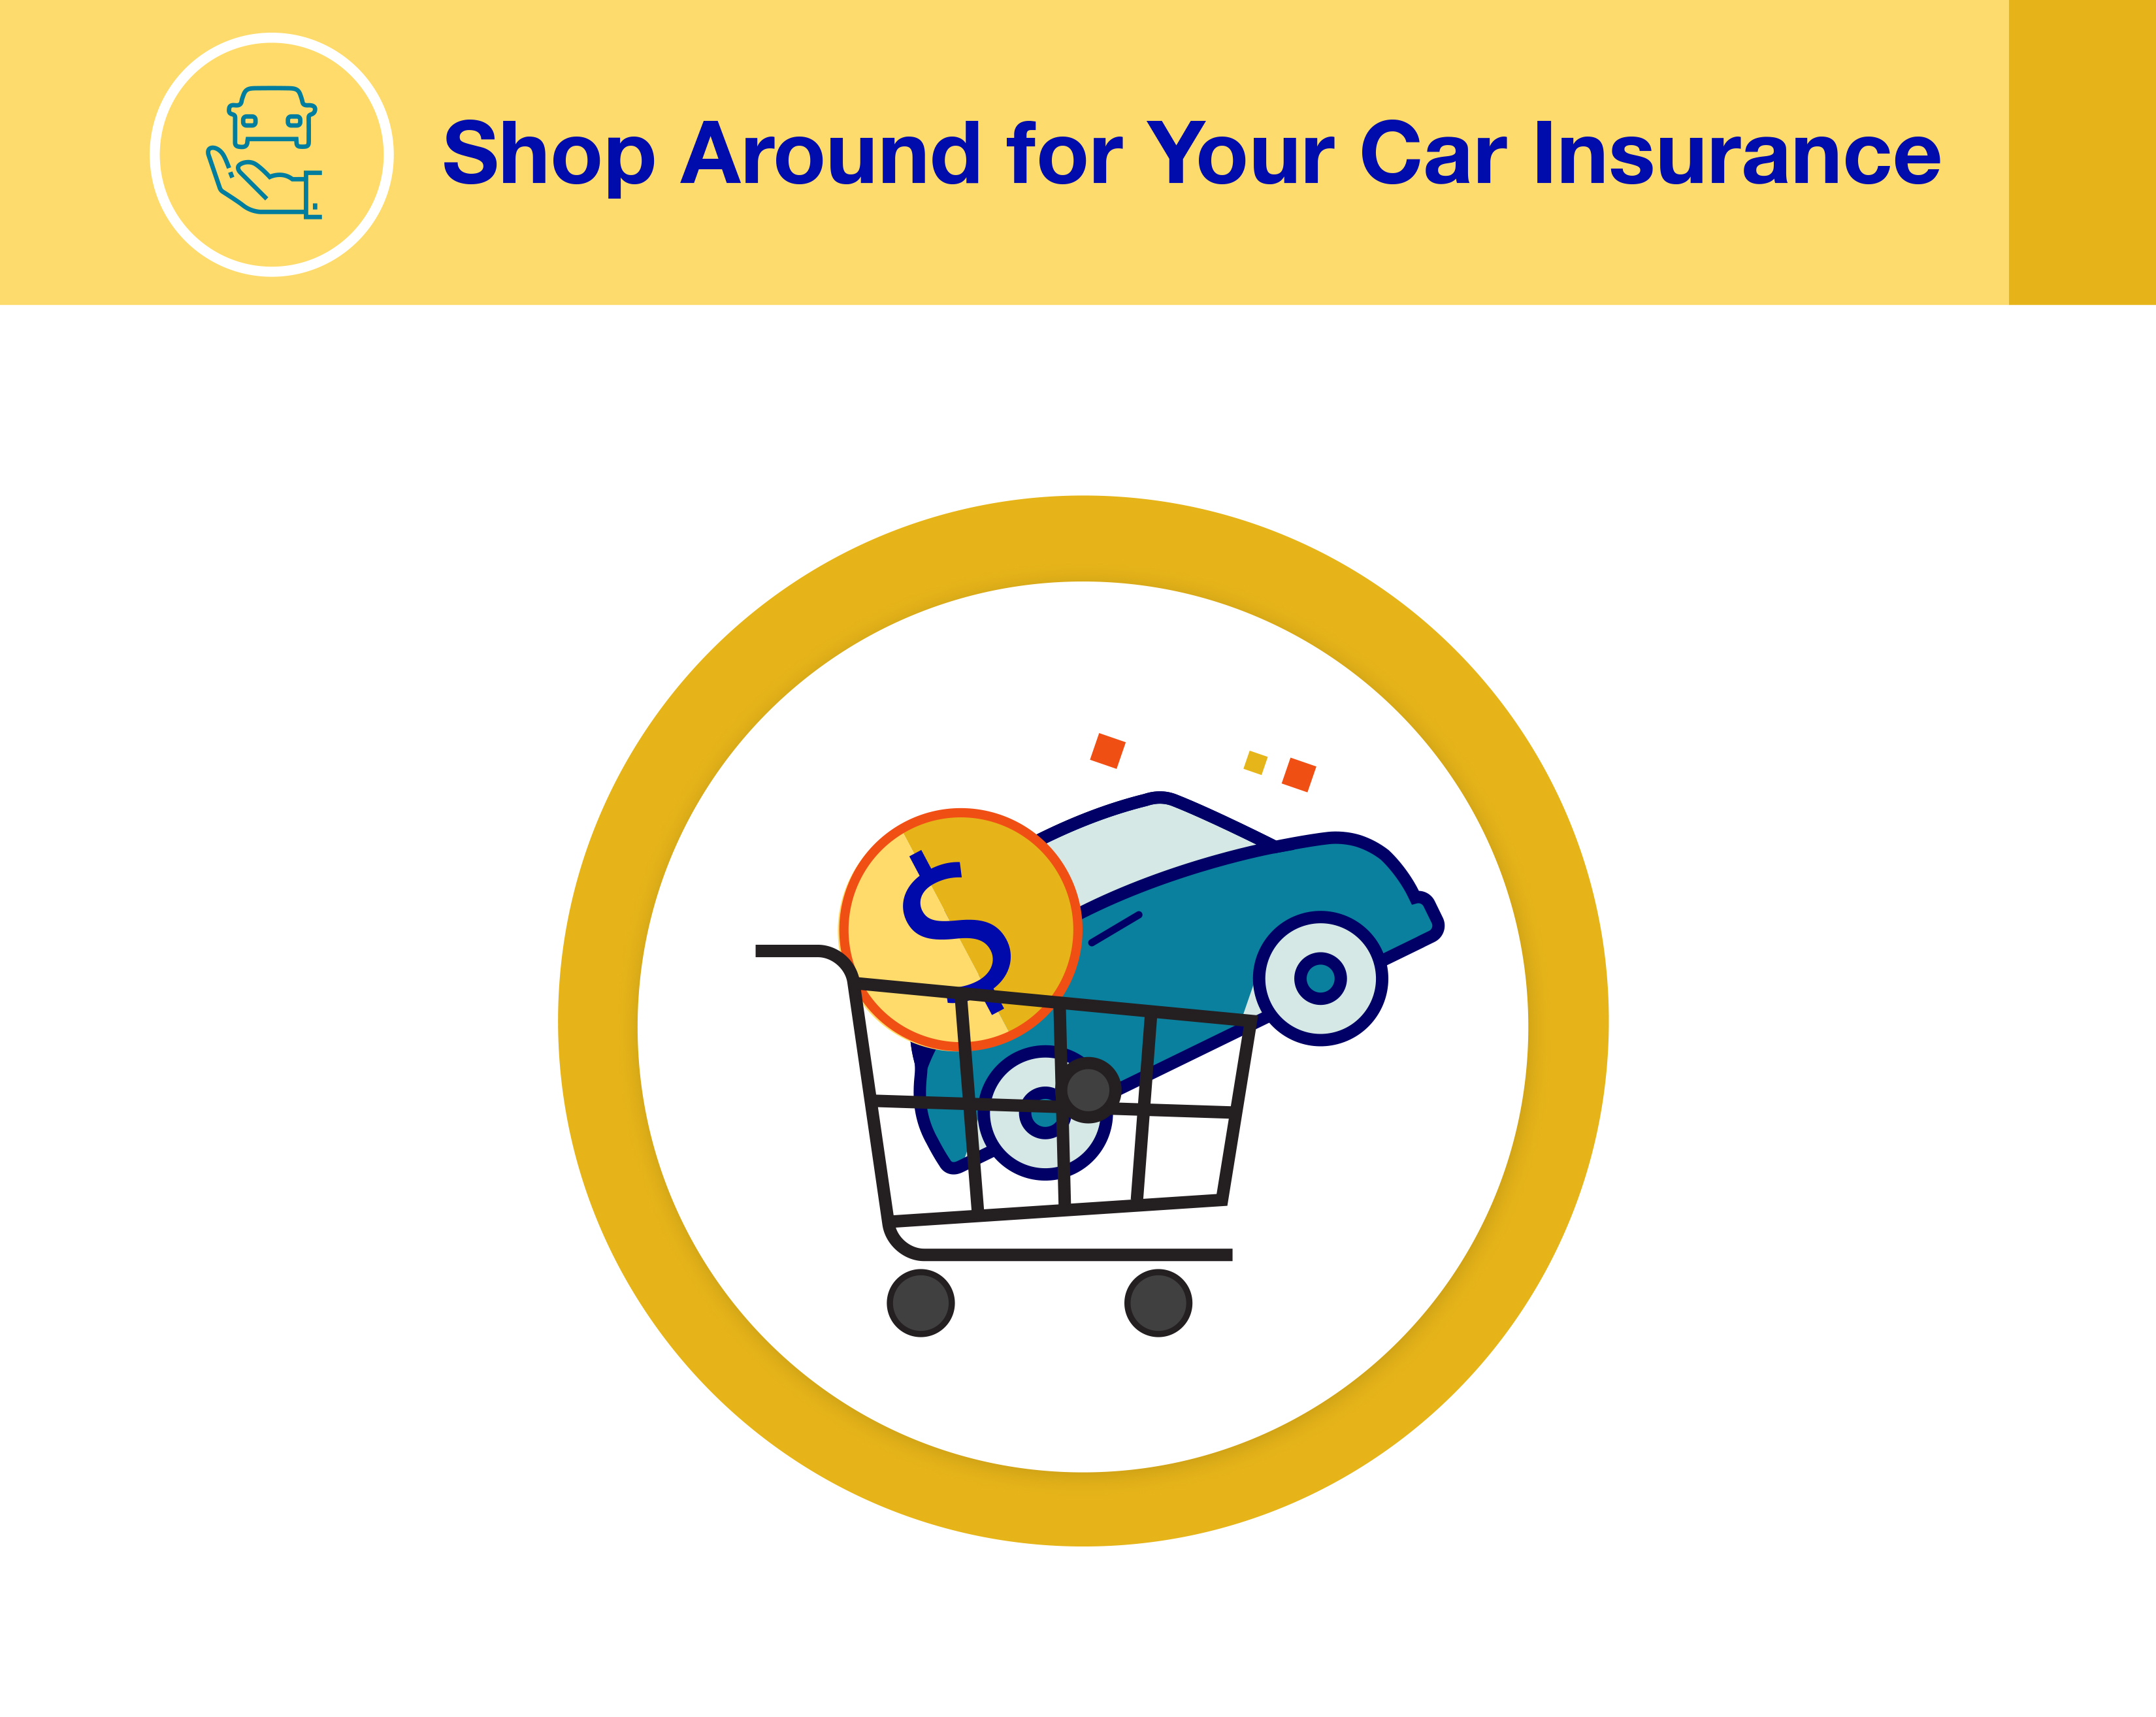 Shop around for your car insurance